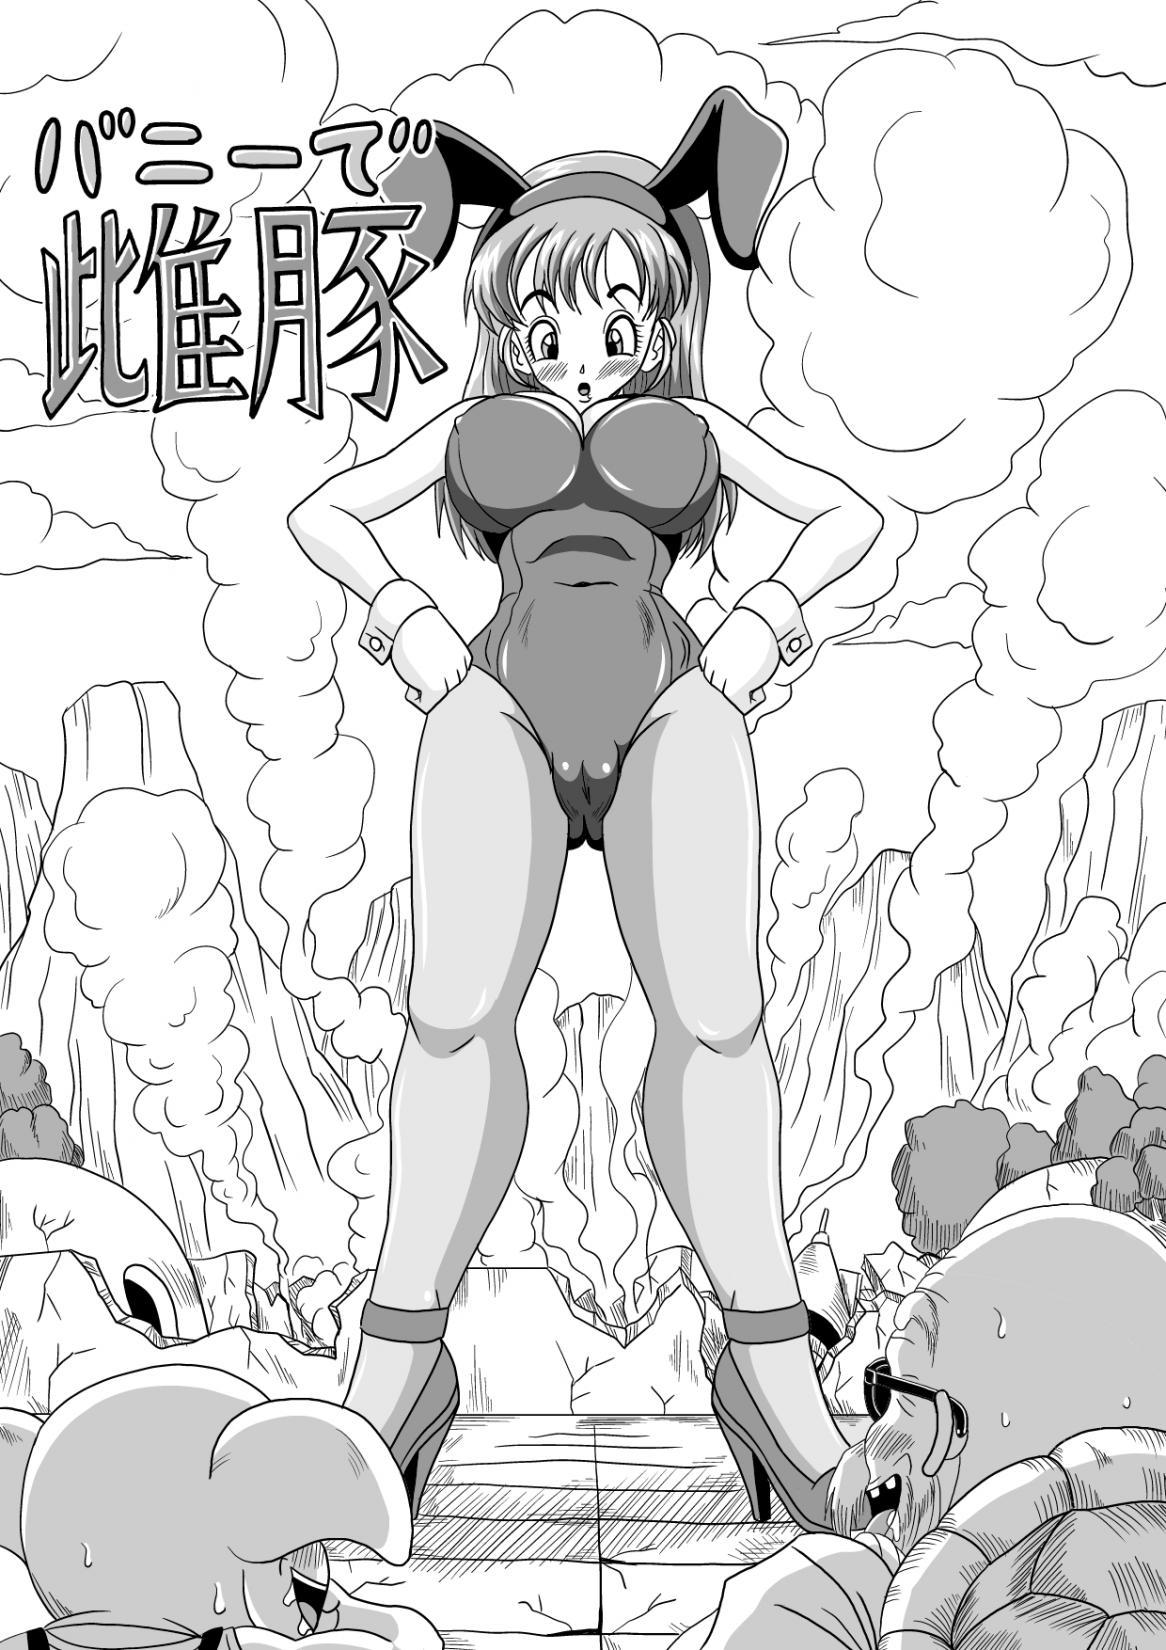 Sofa Sow in the Bunny - Dragon ball Porno Amateur - Page 5